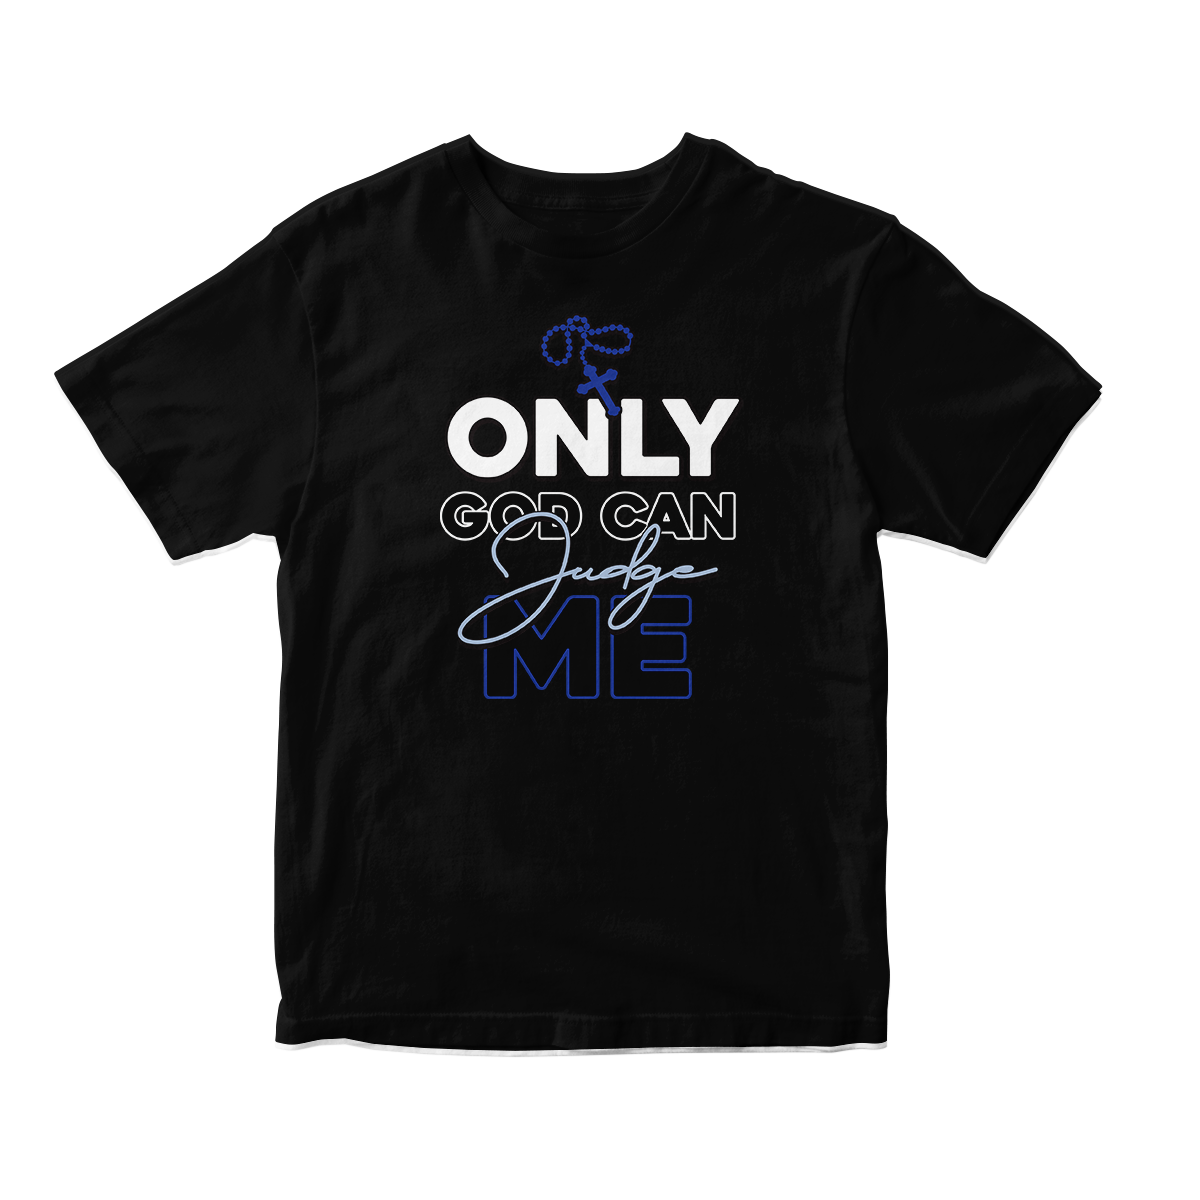 'Only God Can Judge Me' in Space Jam CW Short Sleeve Tee